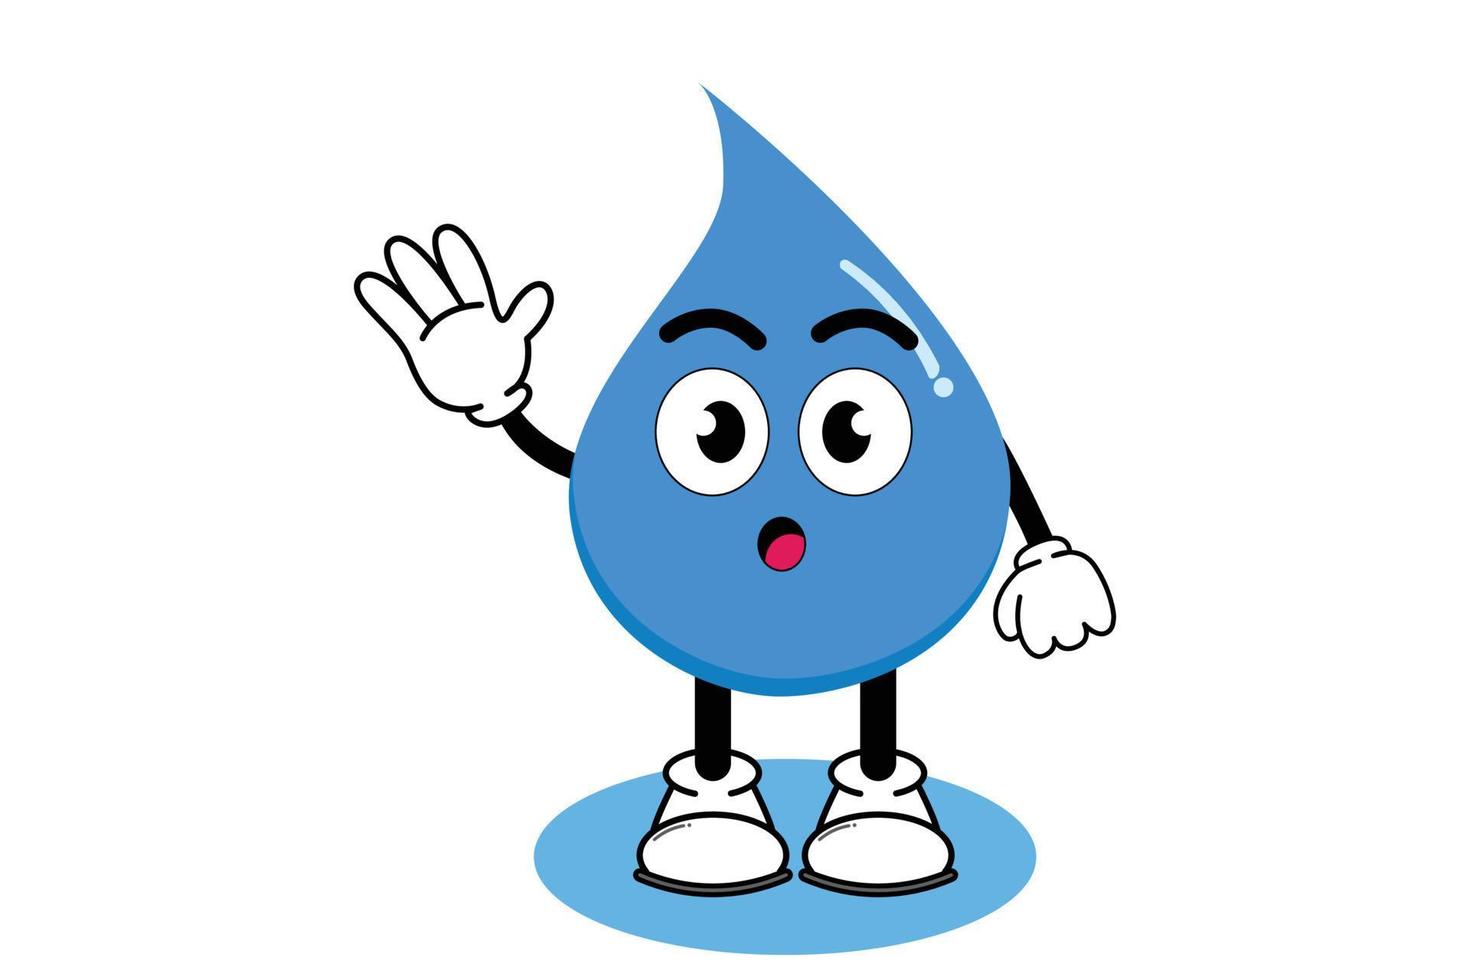 Illustration vector graphic cartoon character of cute mascot water with pose. Suitable for children book illustration and element design.